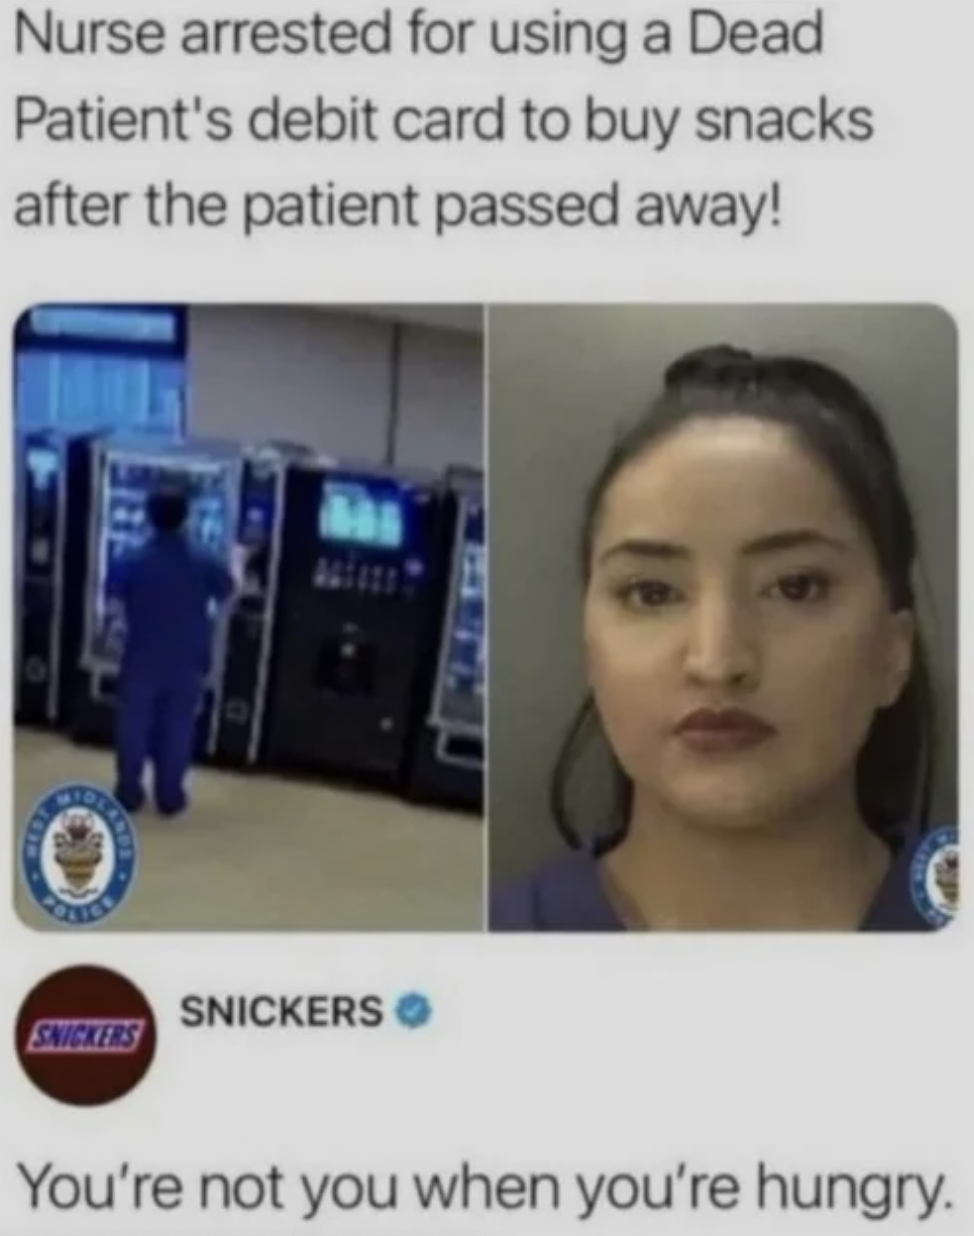 Facepalms and Fails - nurse arrested for using patients debit card - Nurse arrested for using a Dead Patient's debit card to buy snacks after the patient passed away! Snickers Snickers You're not you when you're hungry.